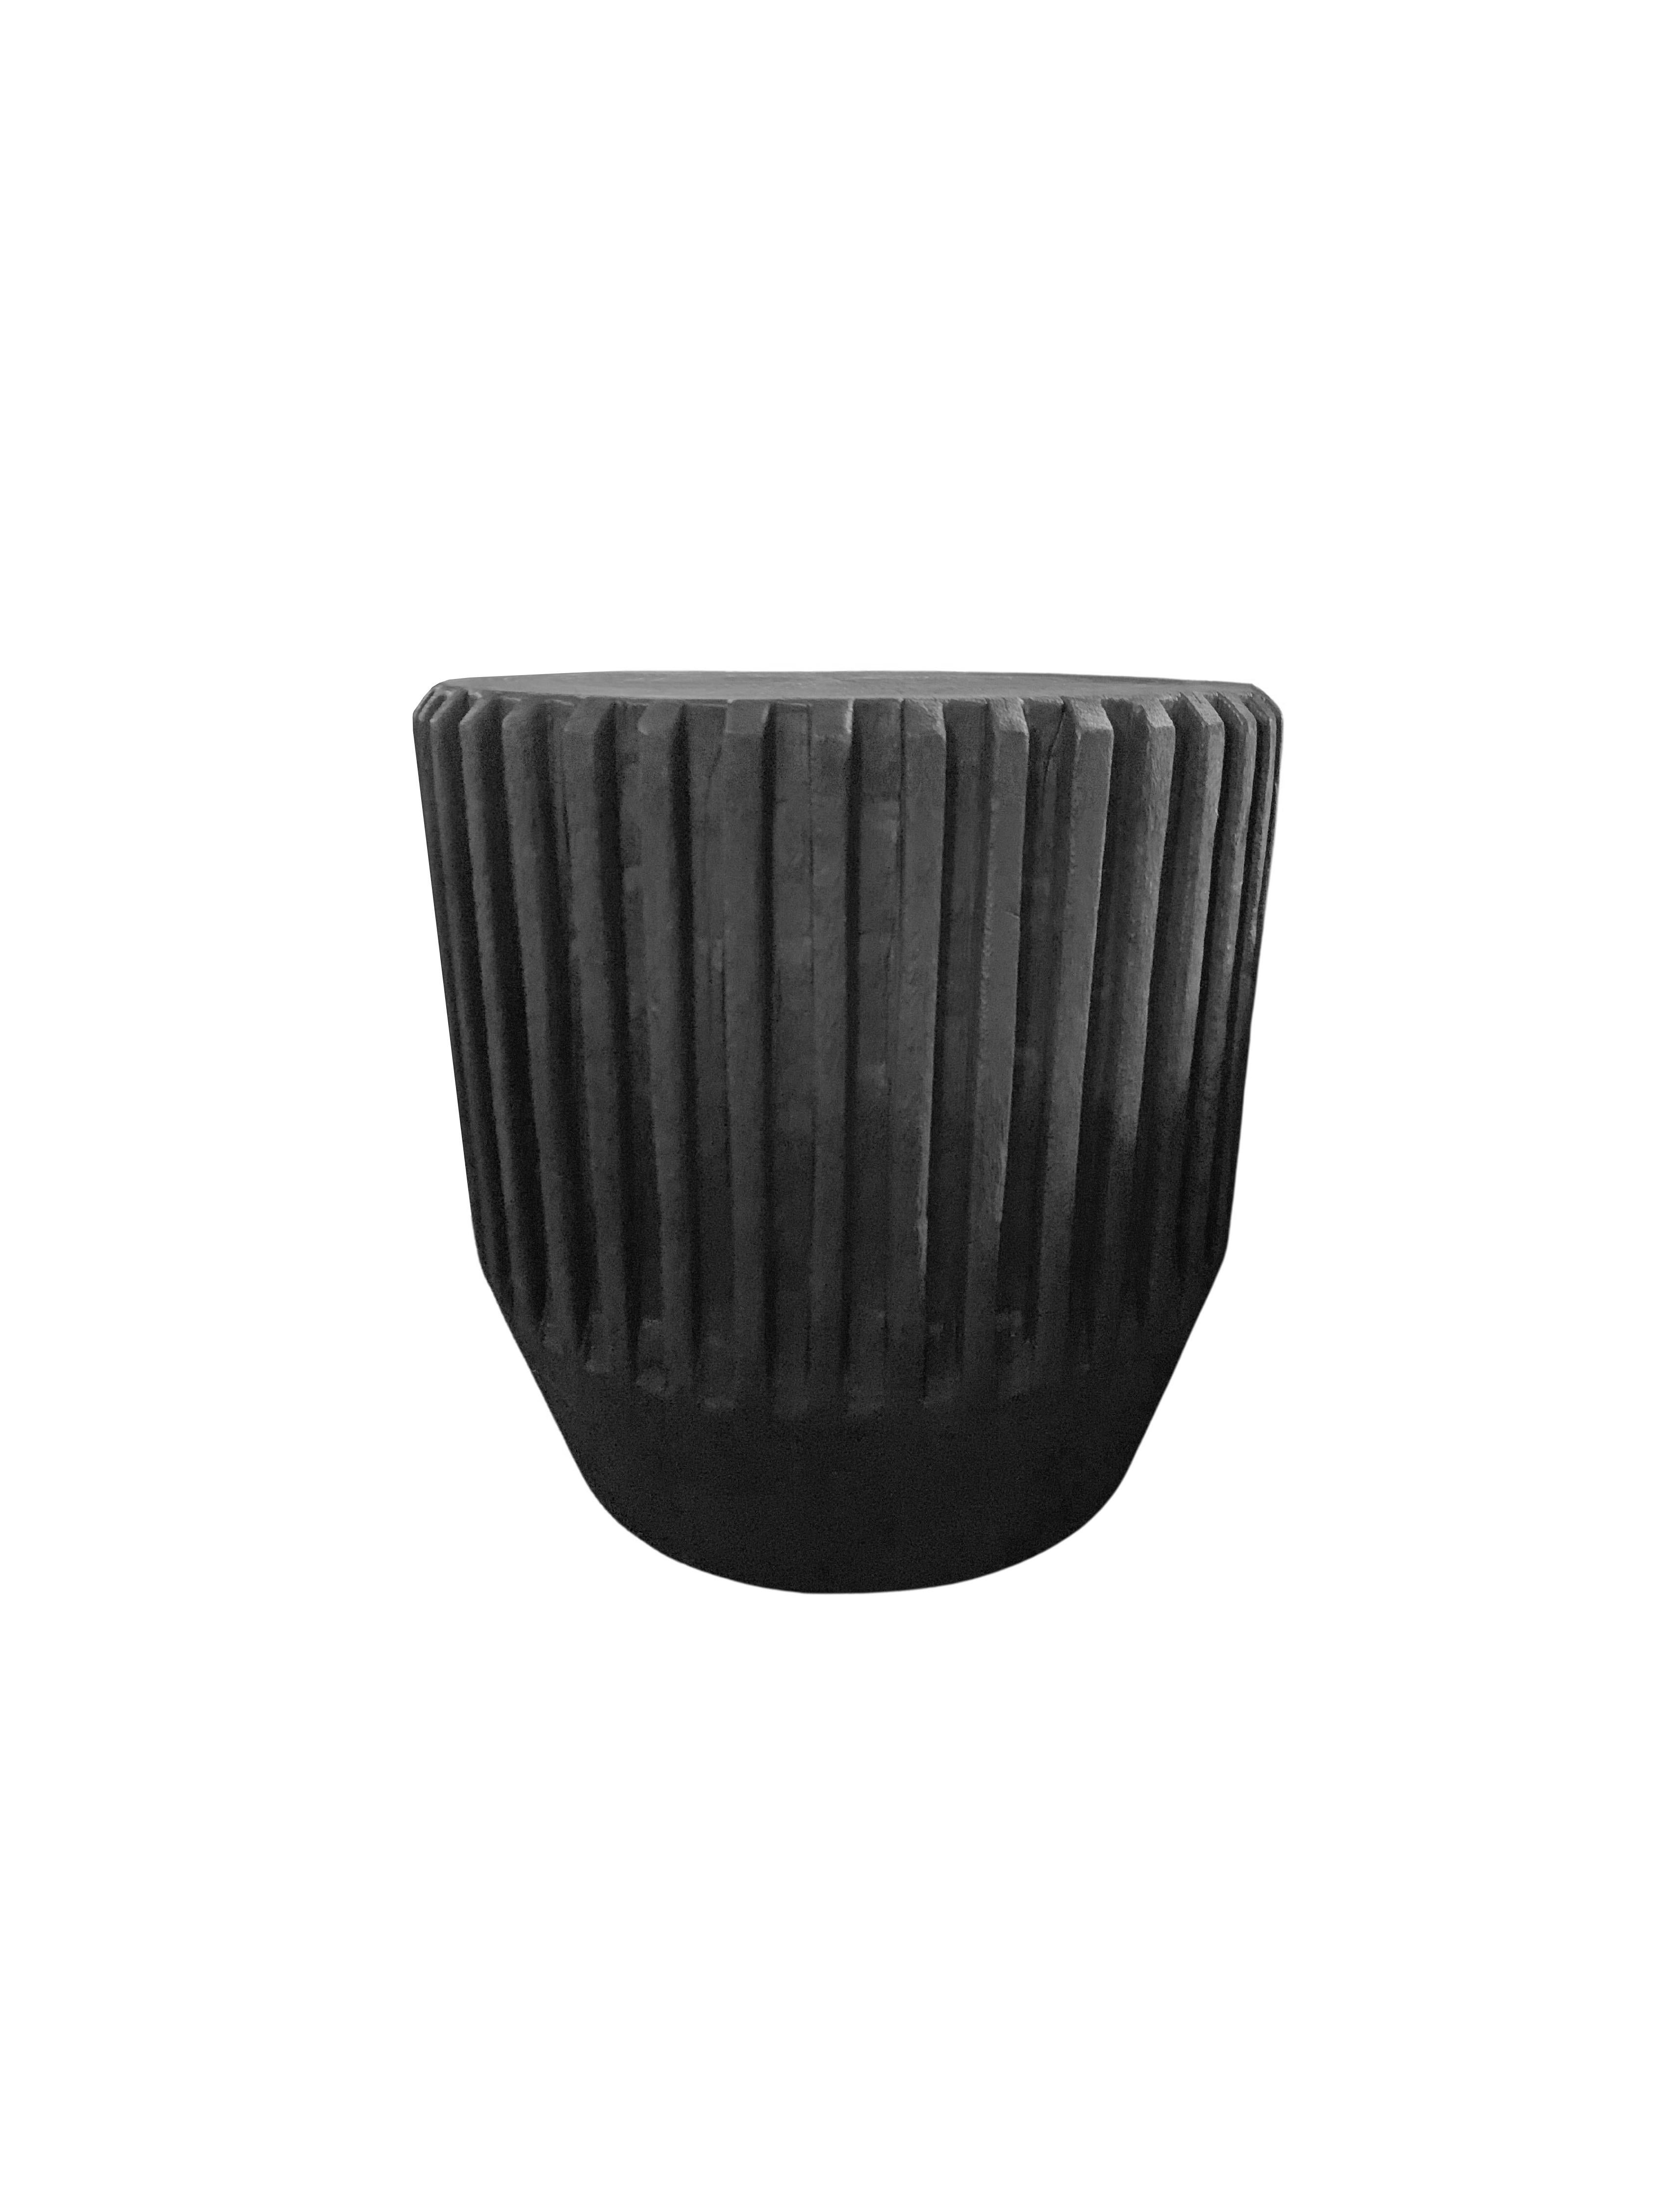 A wonderfully sculptural round side table with a hand-carved, ribbed design on its exterior. Its rich black pigment was achieved through burning the wood three times. Its neutral pigment and subtle wood texture makes it perfect for any space. A